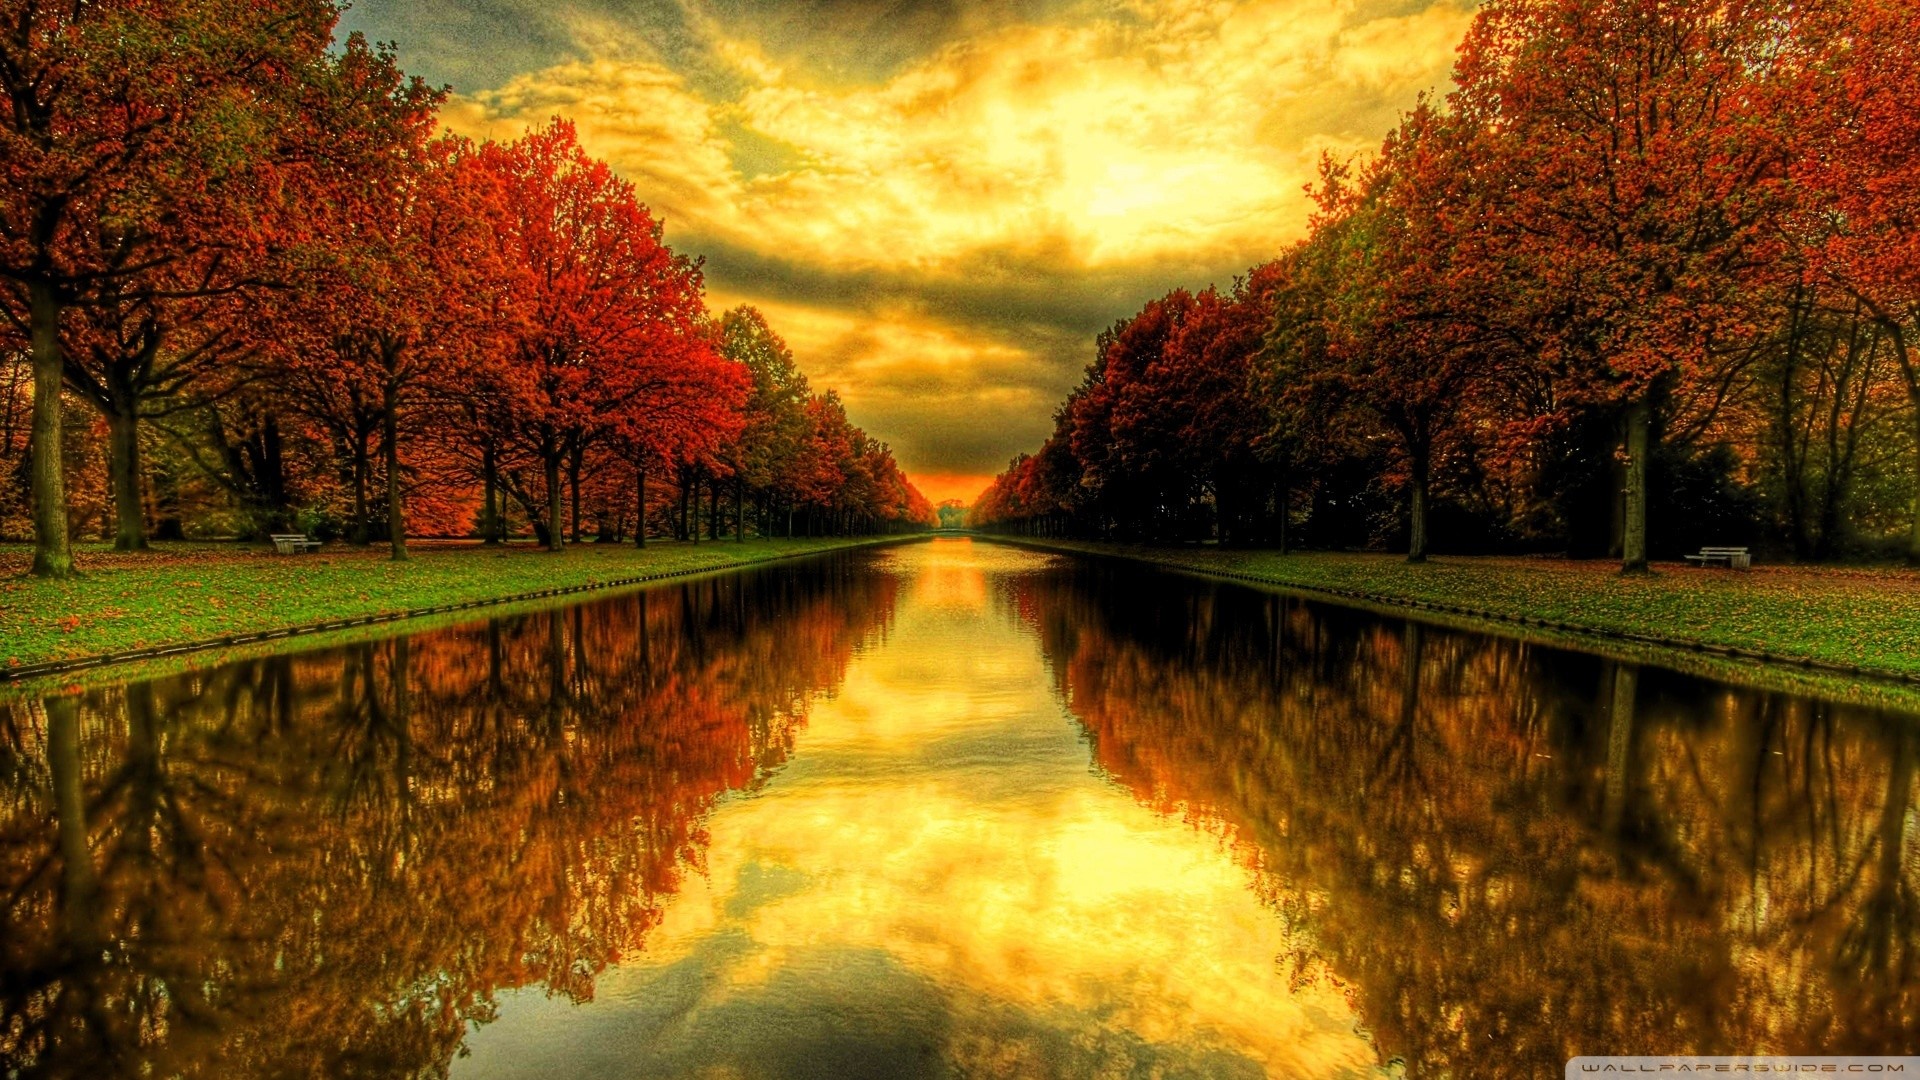 Autumn & Fall Season HD Wallpapers For Download